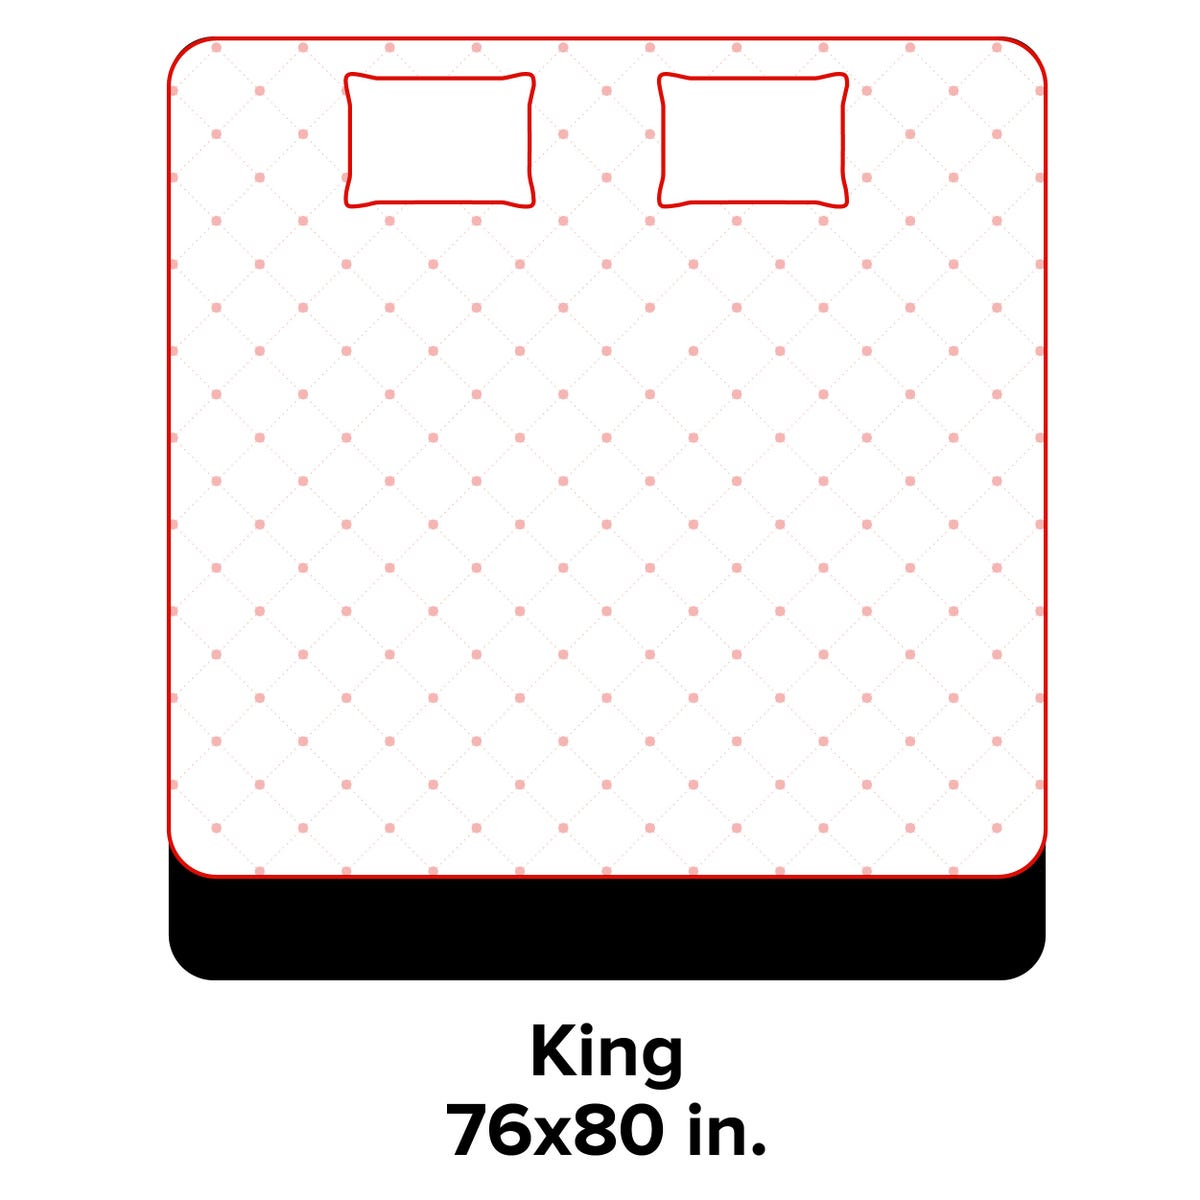 mattress-size-guide-graphic-cnet-king